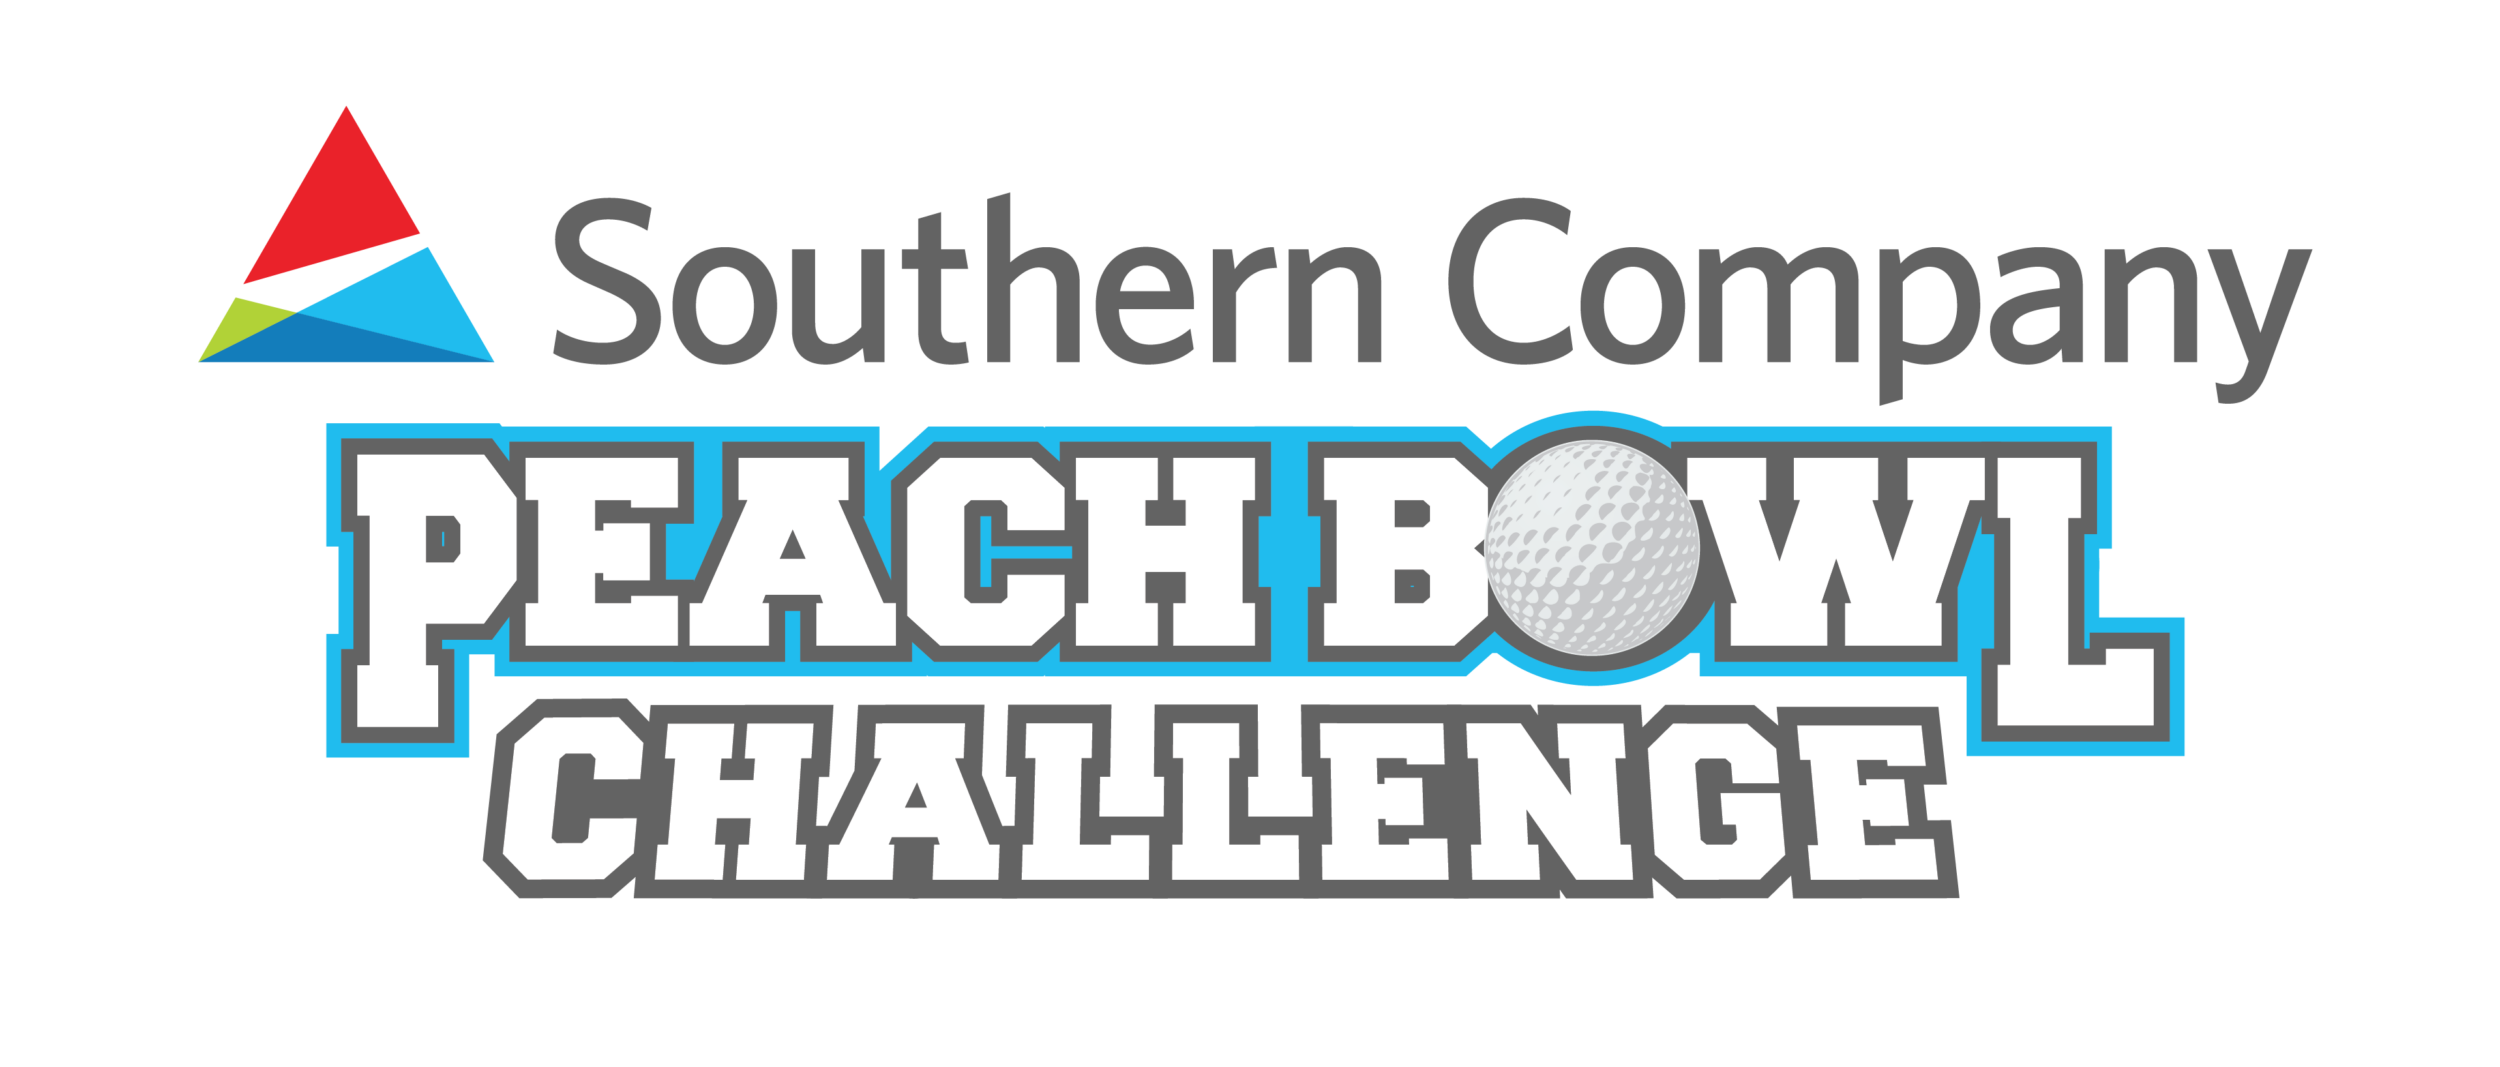 Shane Beamer to Compete in 2023 Southern Company Peach Bowl Challenge